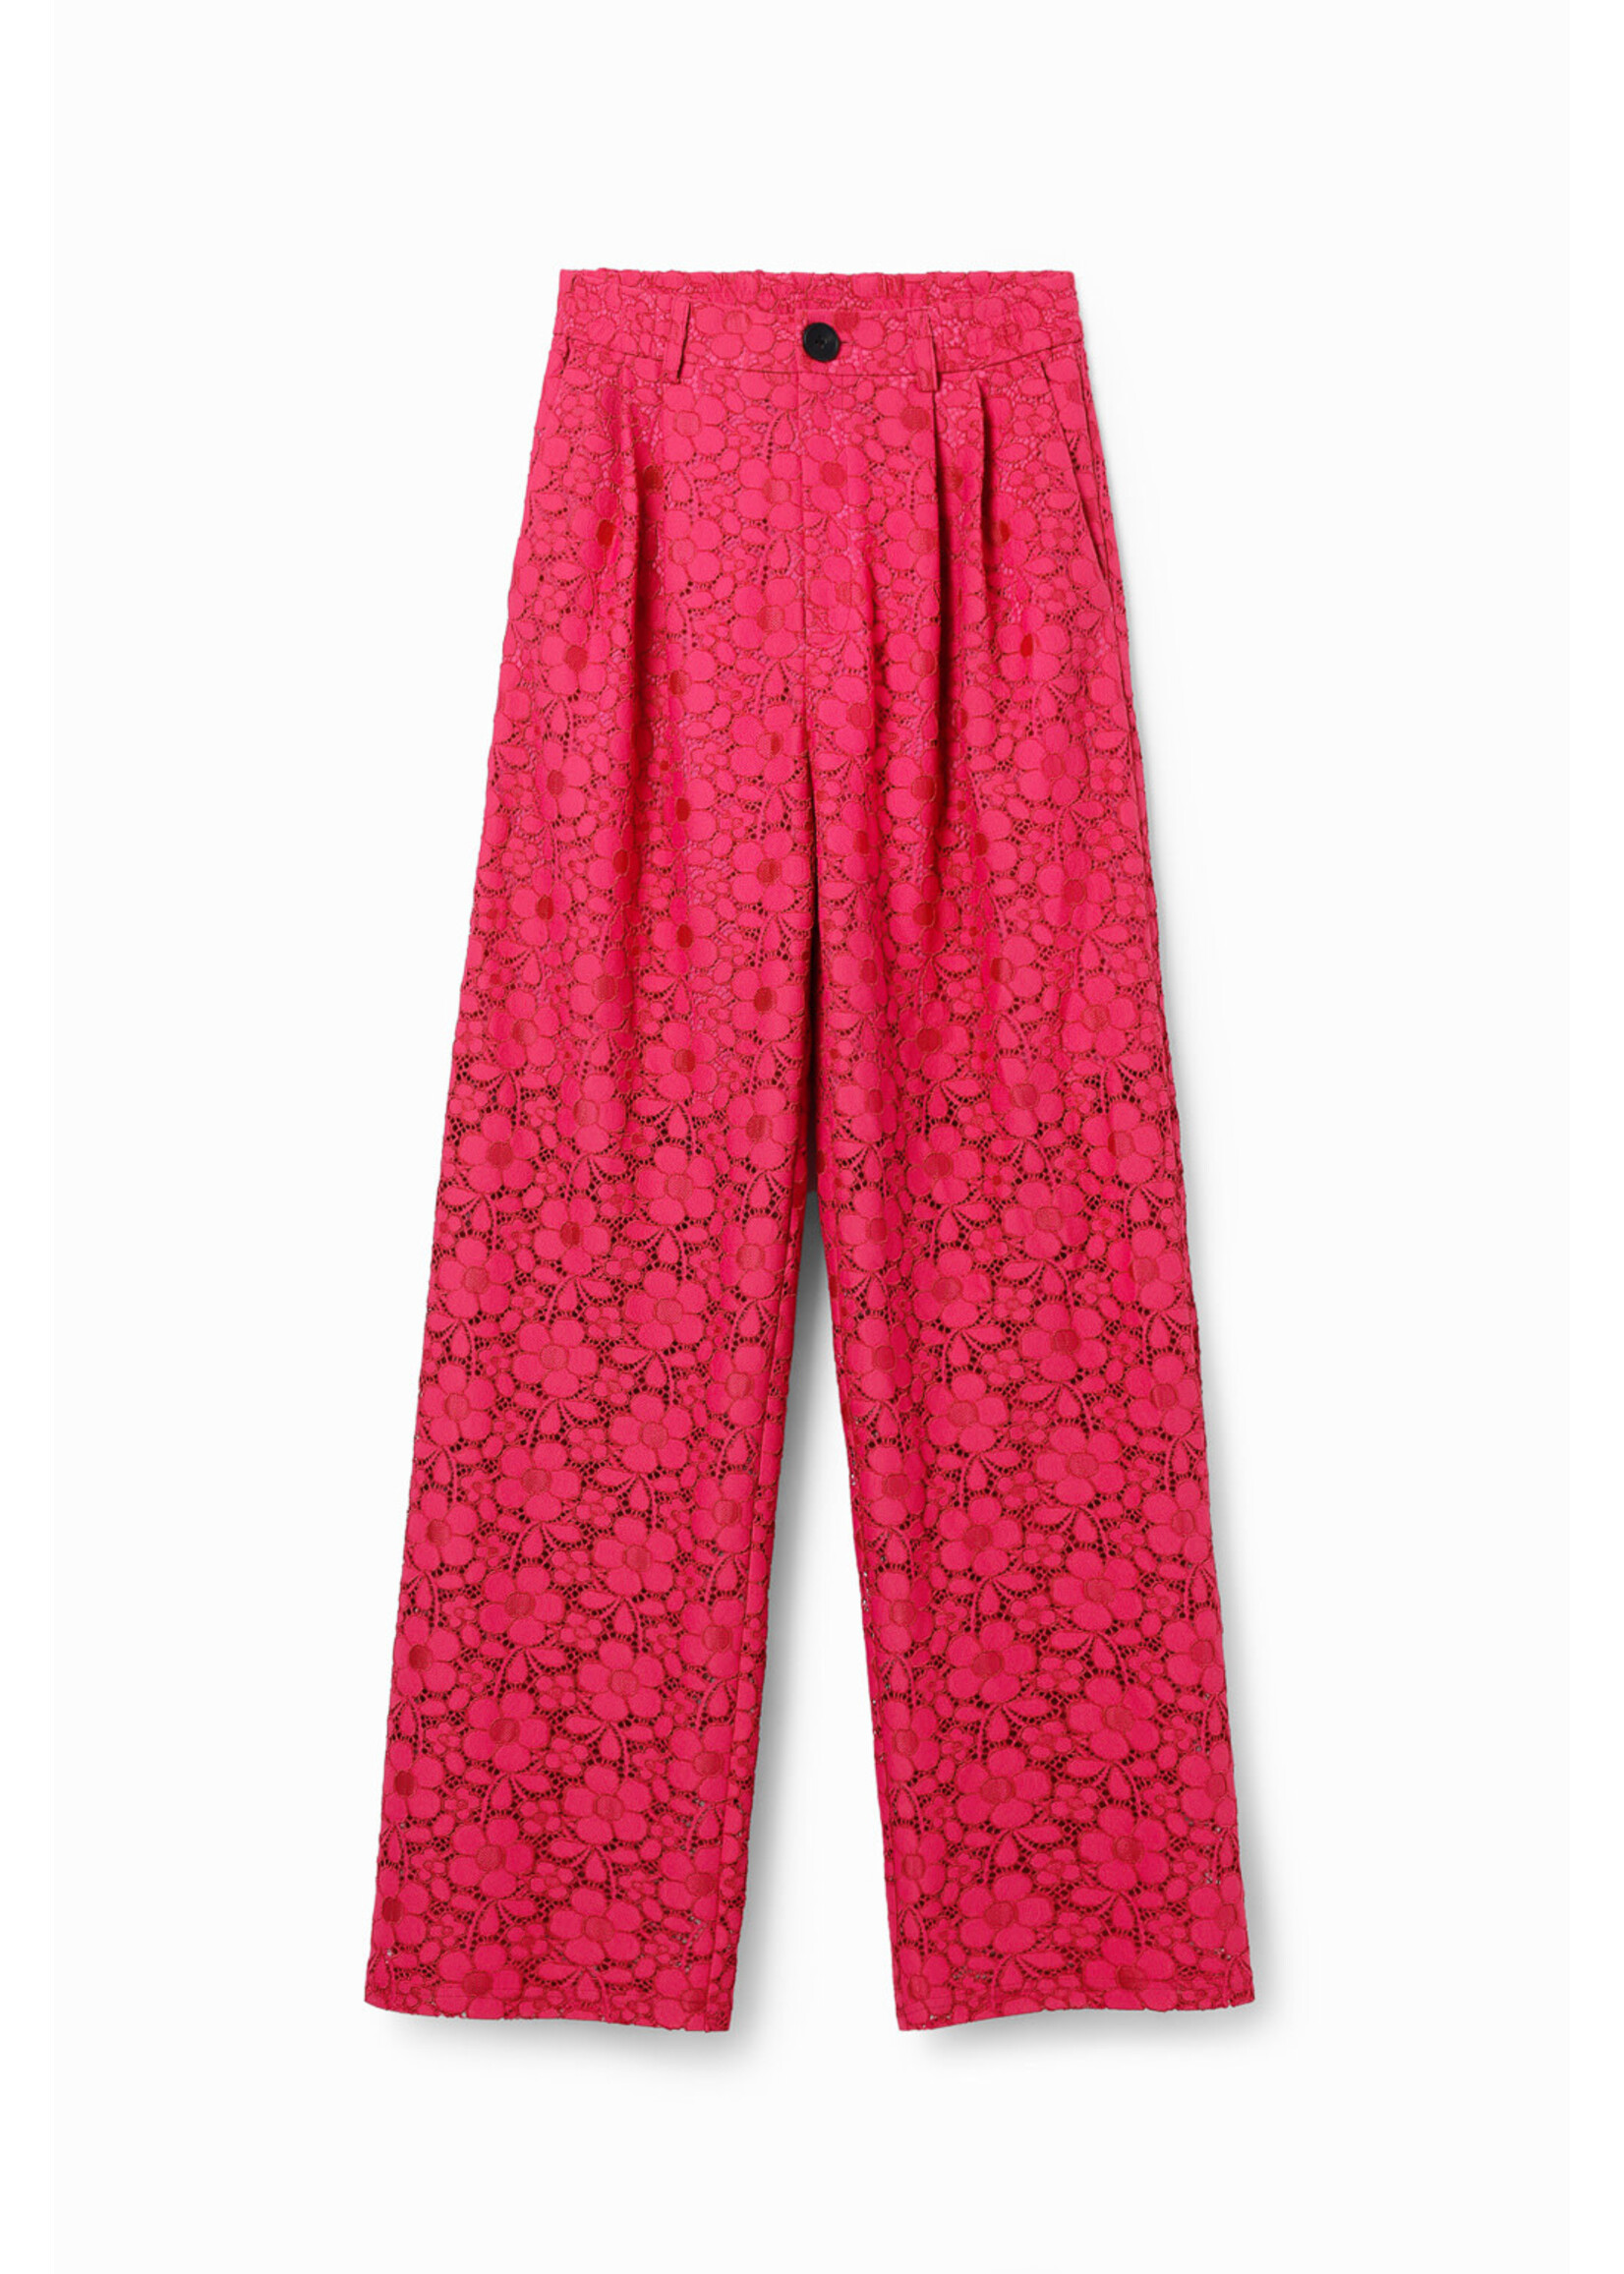 DESIGUAL Tailored floral lace trousers